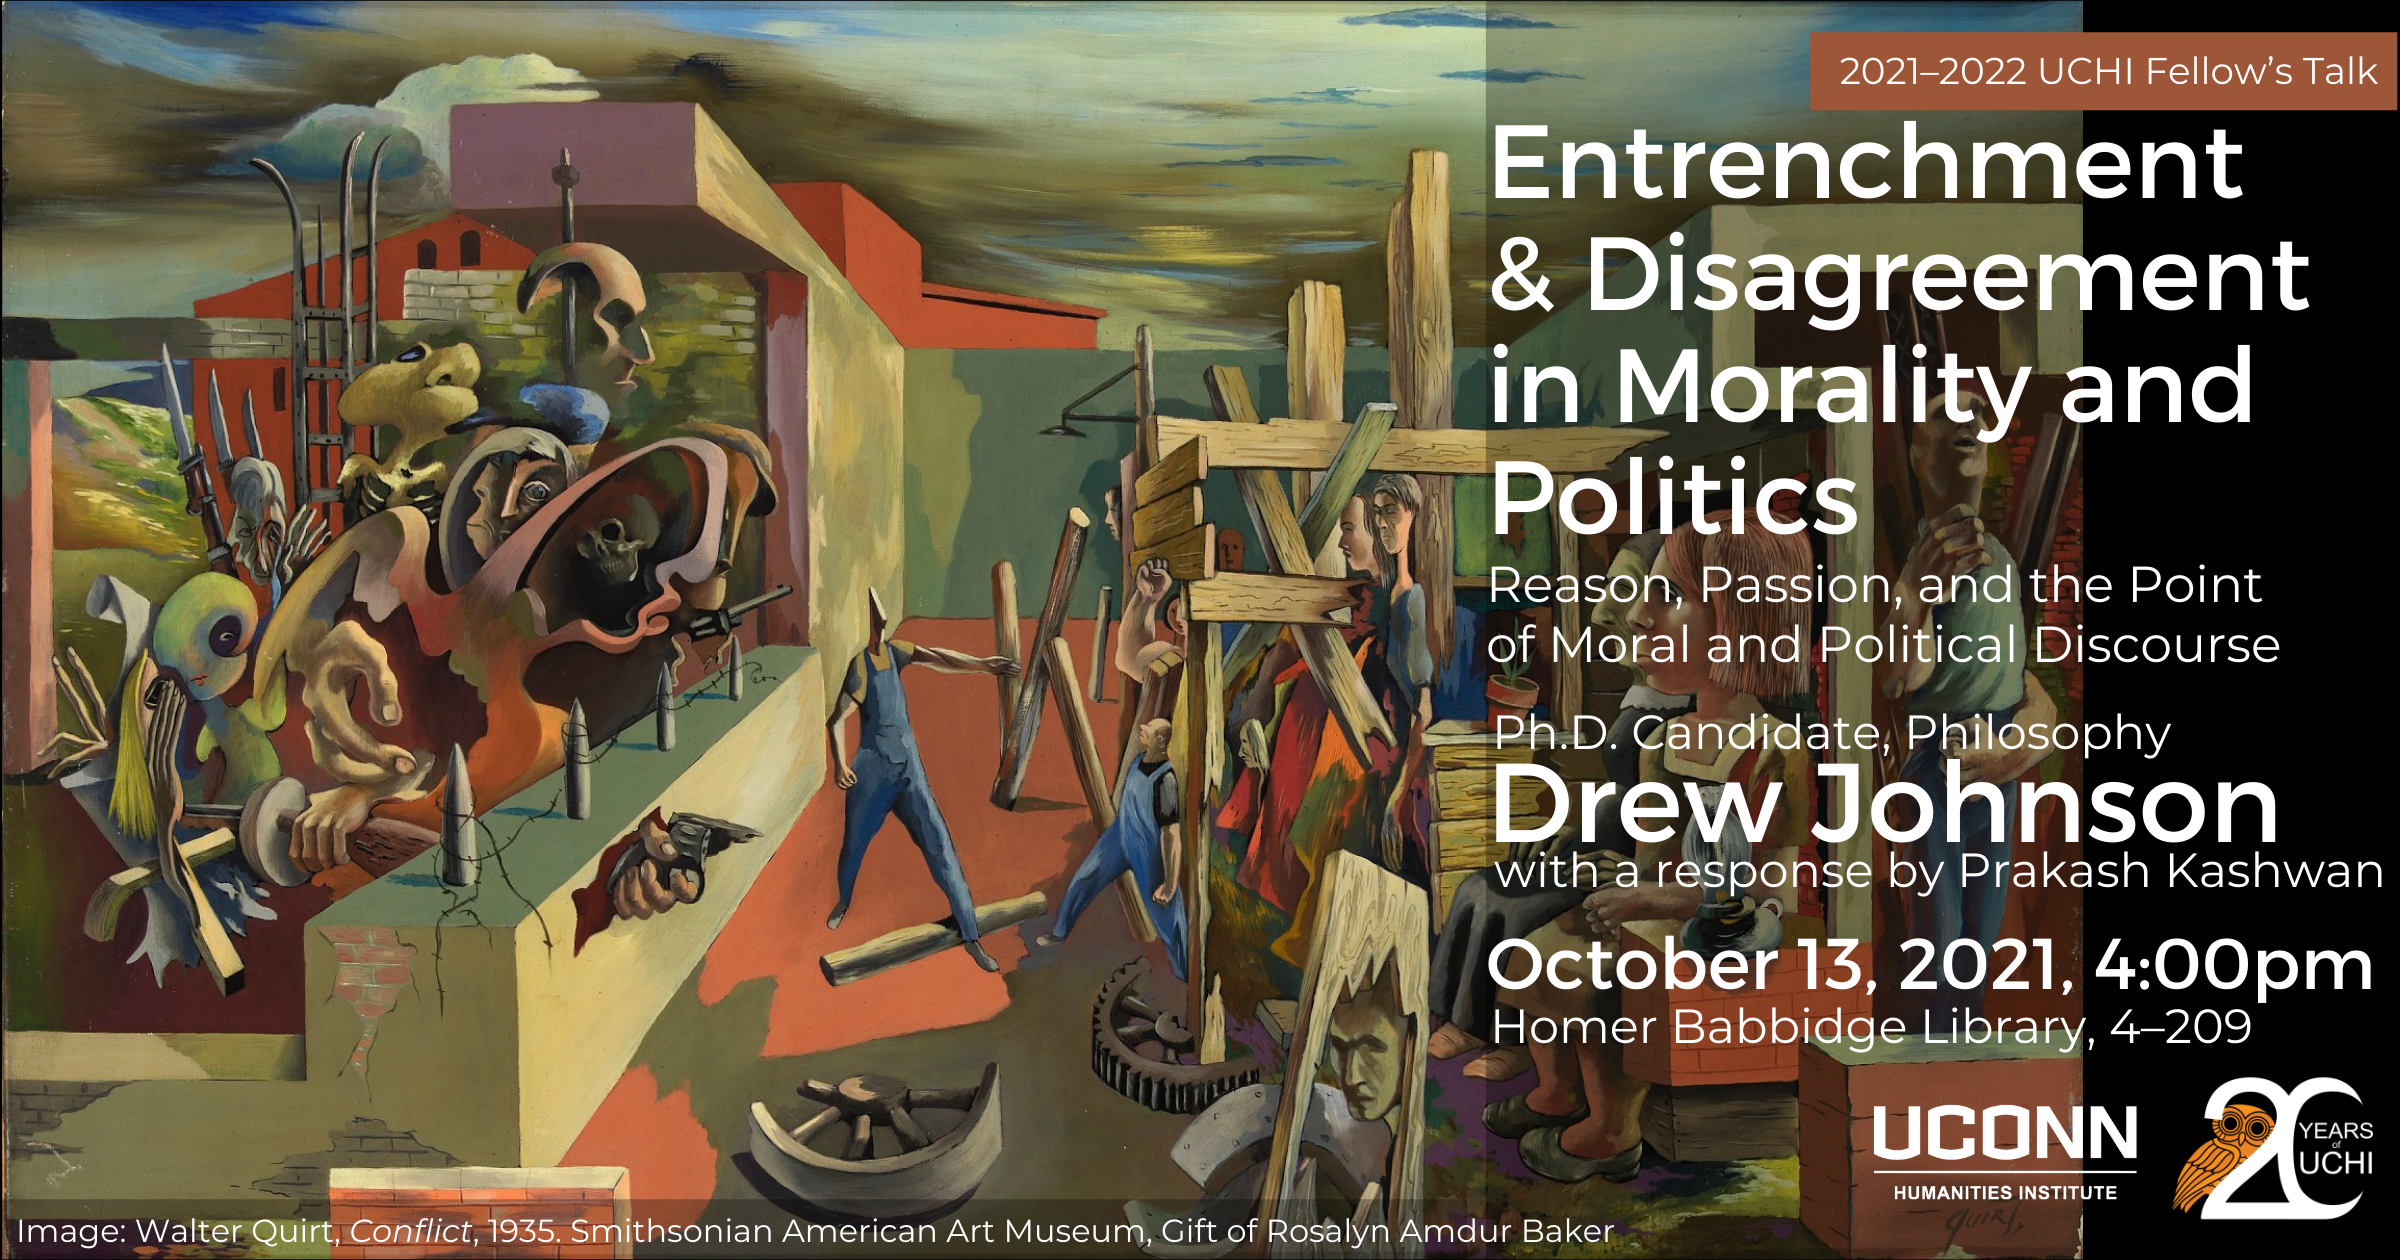 2021–22 UCHI Fellow's Talks. Entrenchment and Disagreement in Morality and Politics: Reason, Passion, and the Point of Moral and Political Discourse. Phd Candidate, Philosophy, Drew Johnson. With a response by Prakash Kashwan. October 13, 2021, 4:00pm, Homer Babbidge Library, 4-209